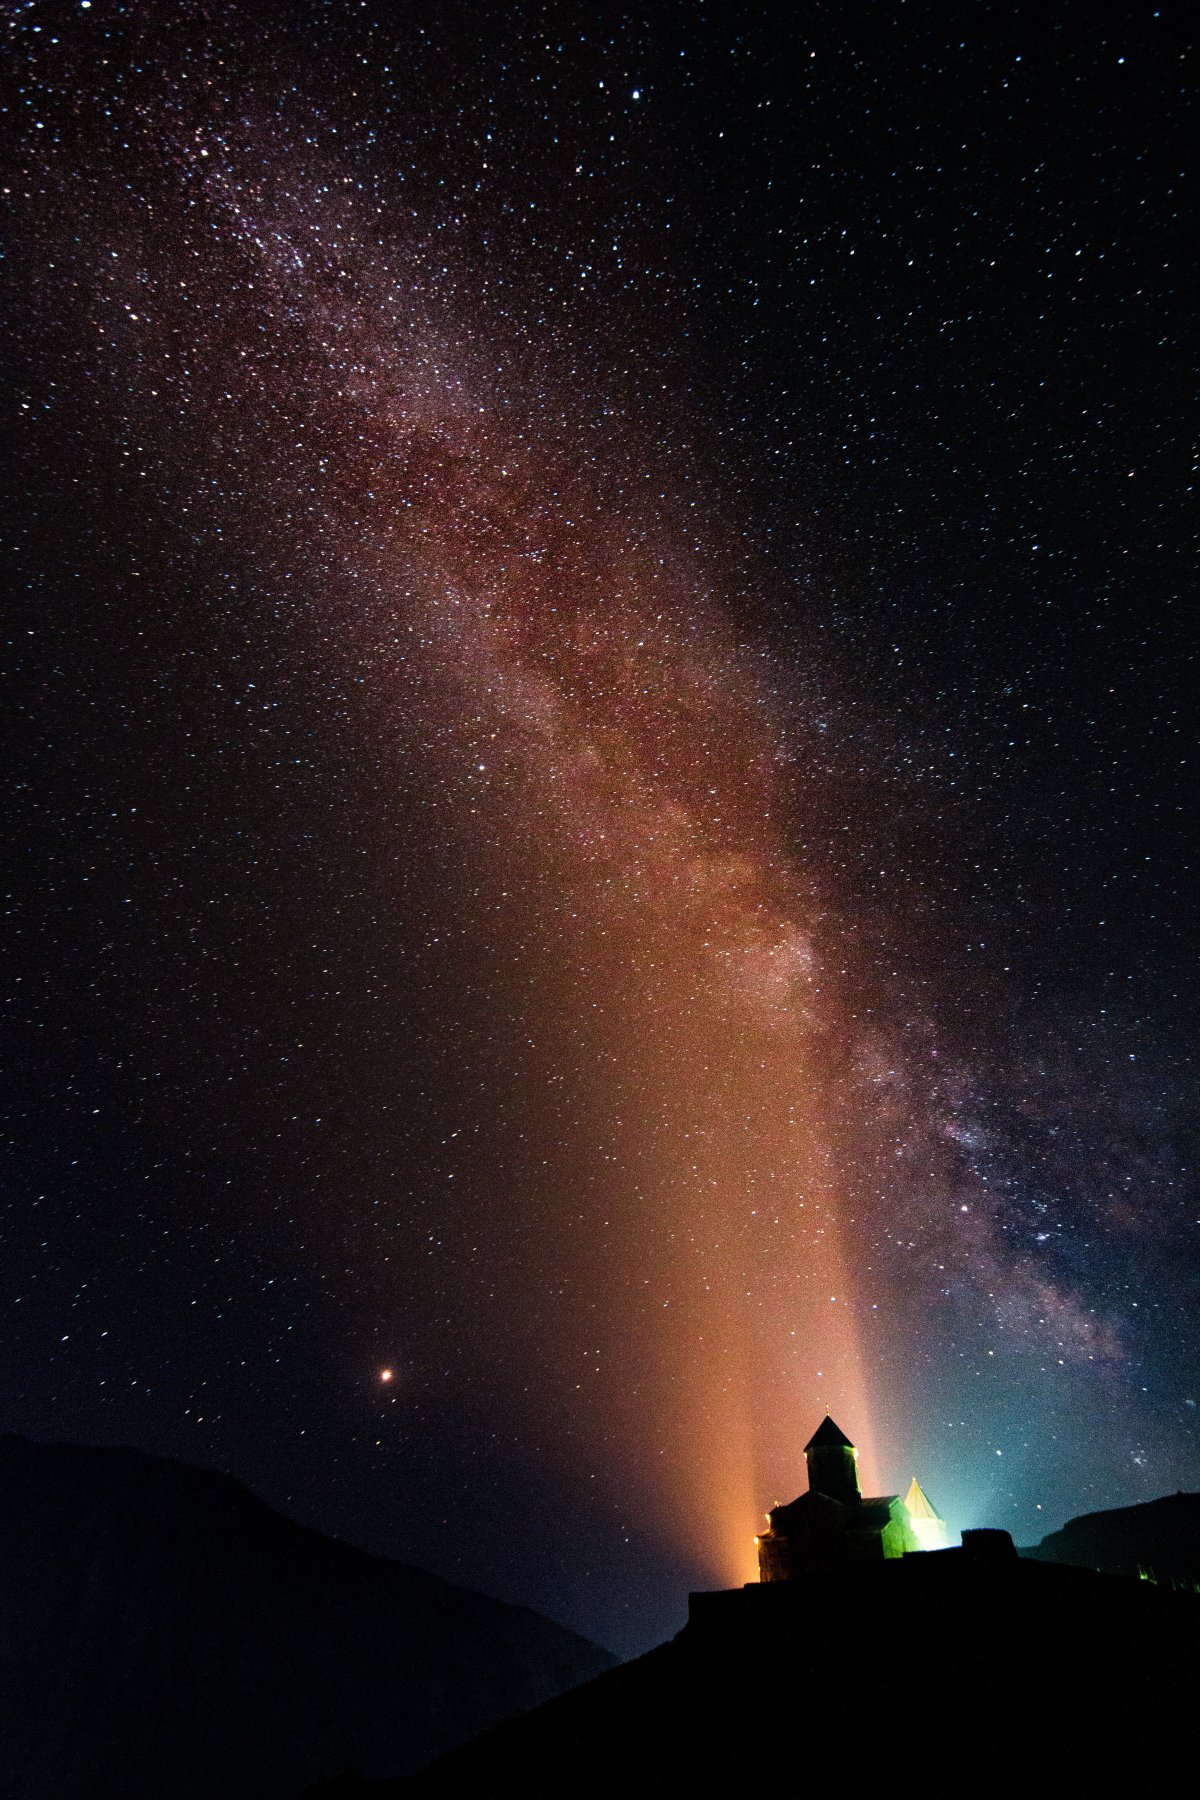 Dreamy and beautiful starry sky pictures